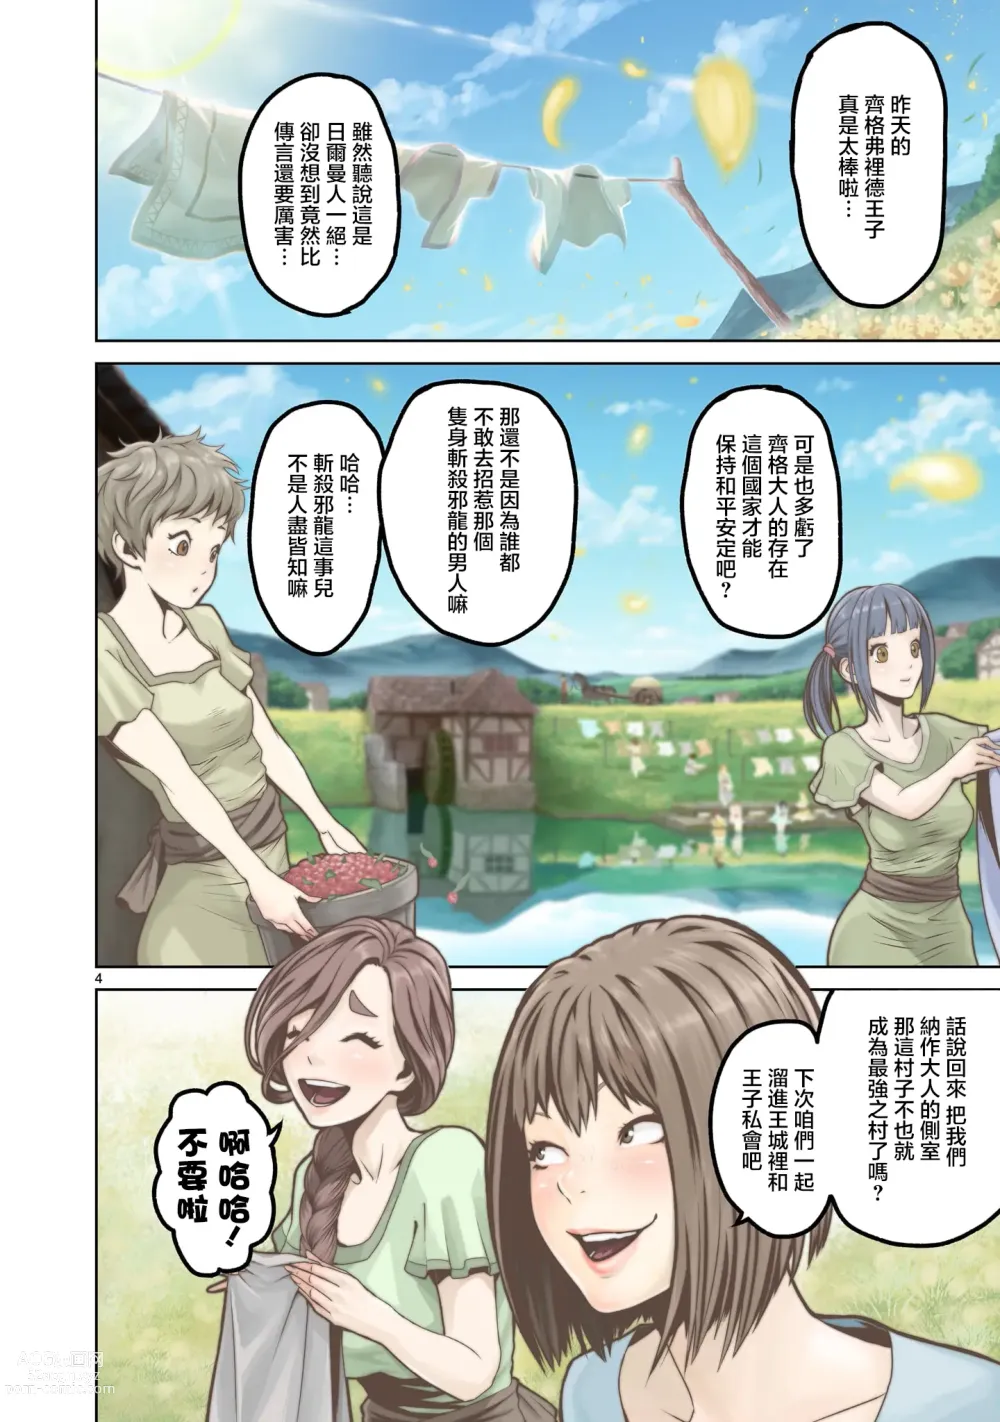 Page 2 of doujinshi 蔷薇园传奇 01Chinese